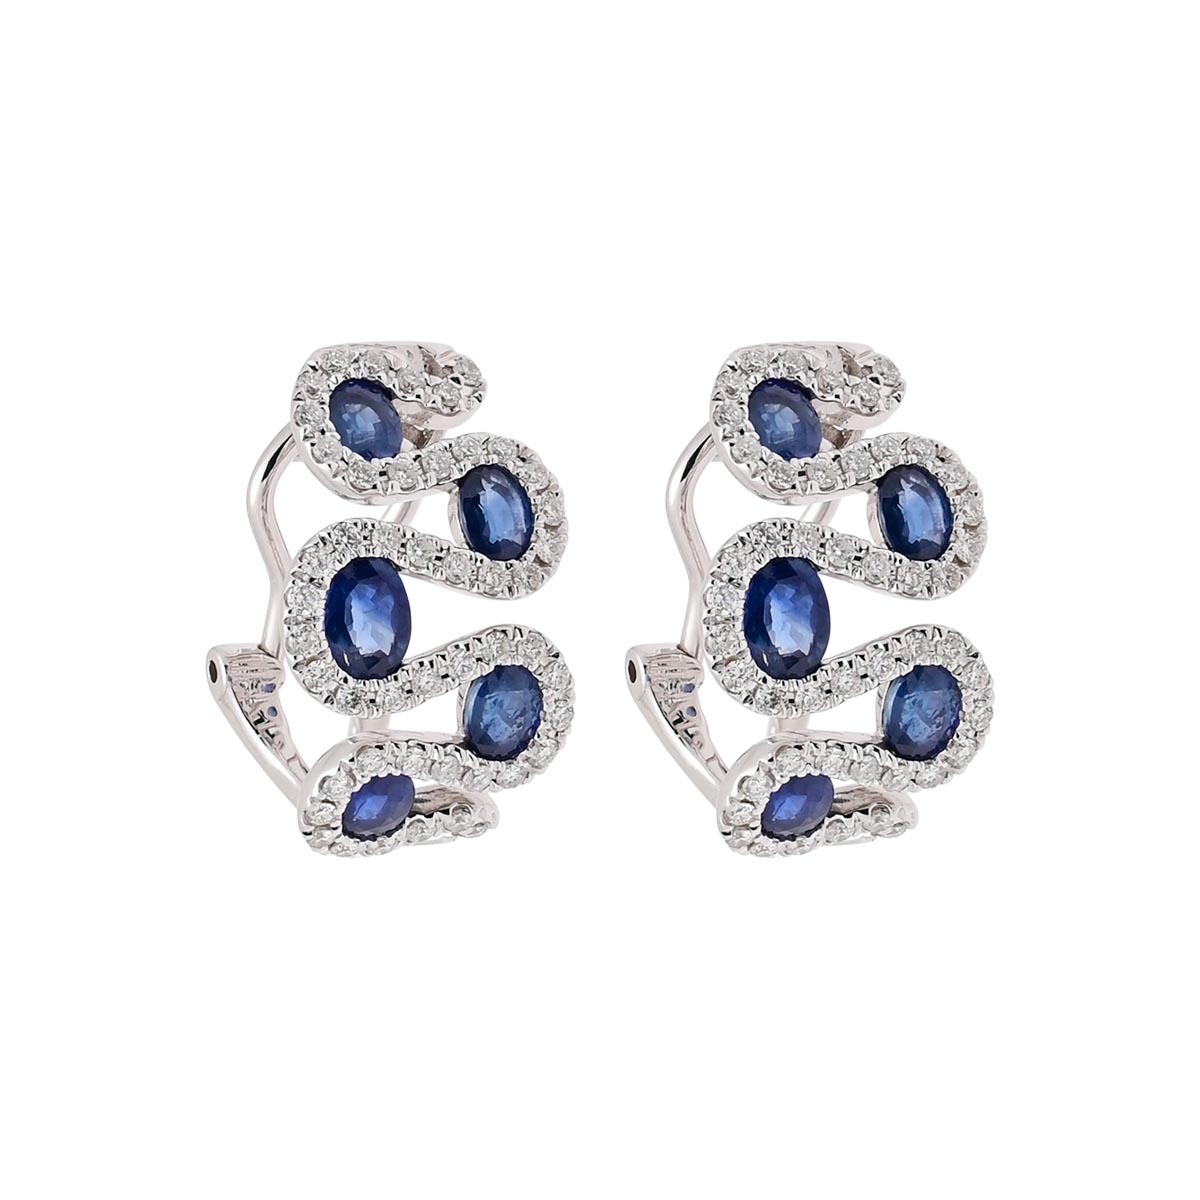 Dabakarov Oval Sapphire Hoop Earrings in 14kt White Gold with Diamonds (1ct tw)